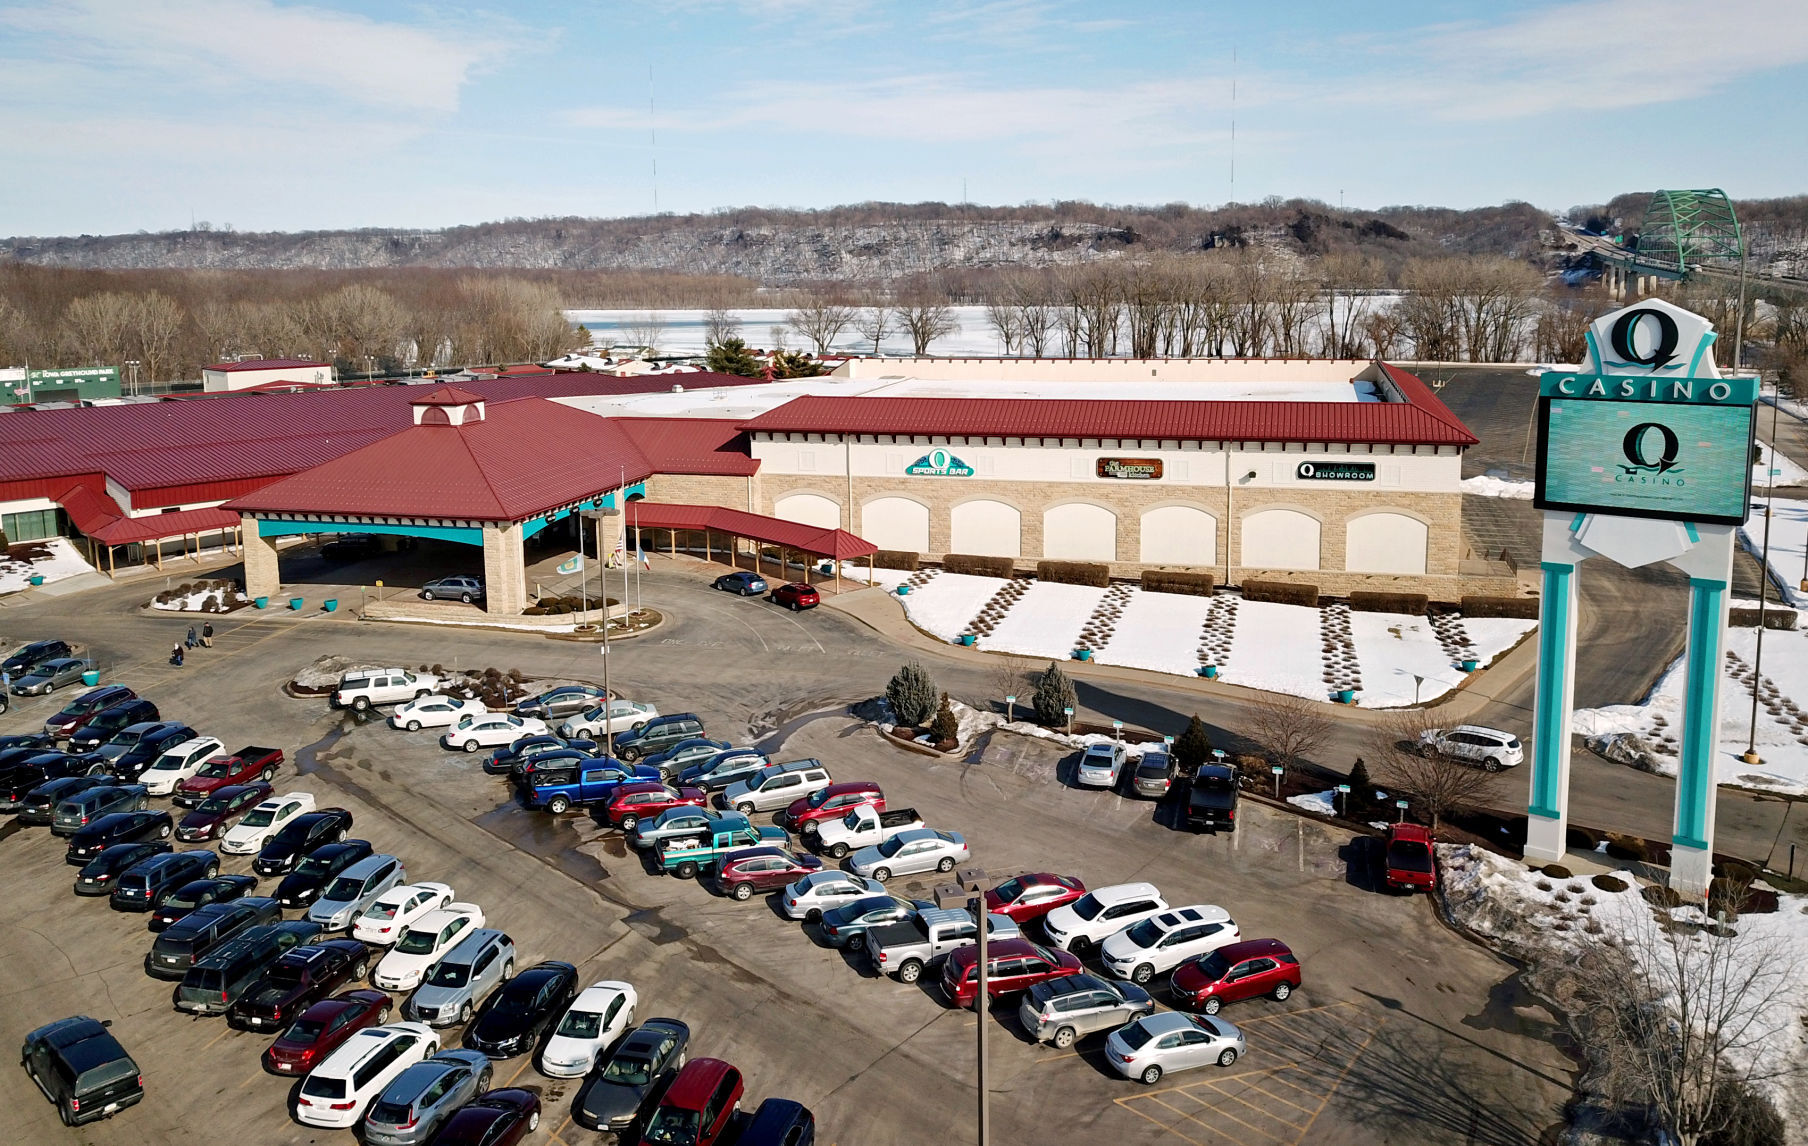 Q Casino in Dubuque recently extended its business hours. PHOTO CREDIT: JESSICA REILLY